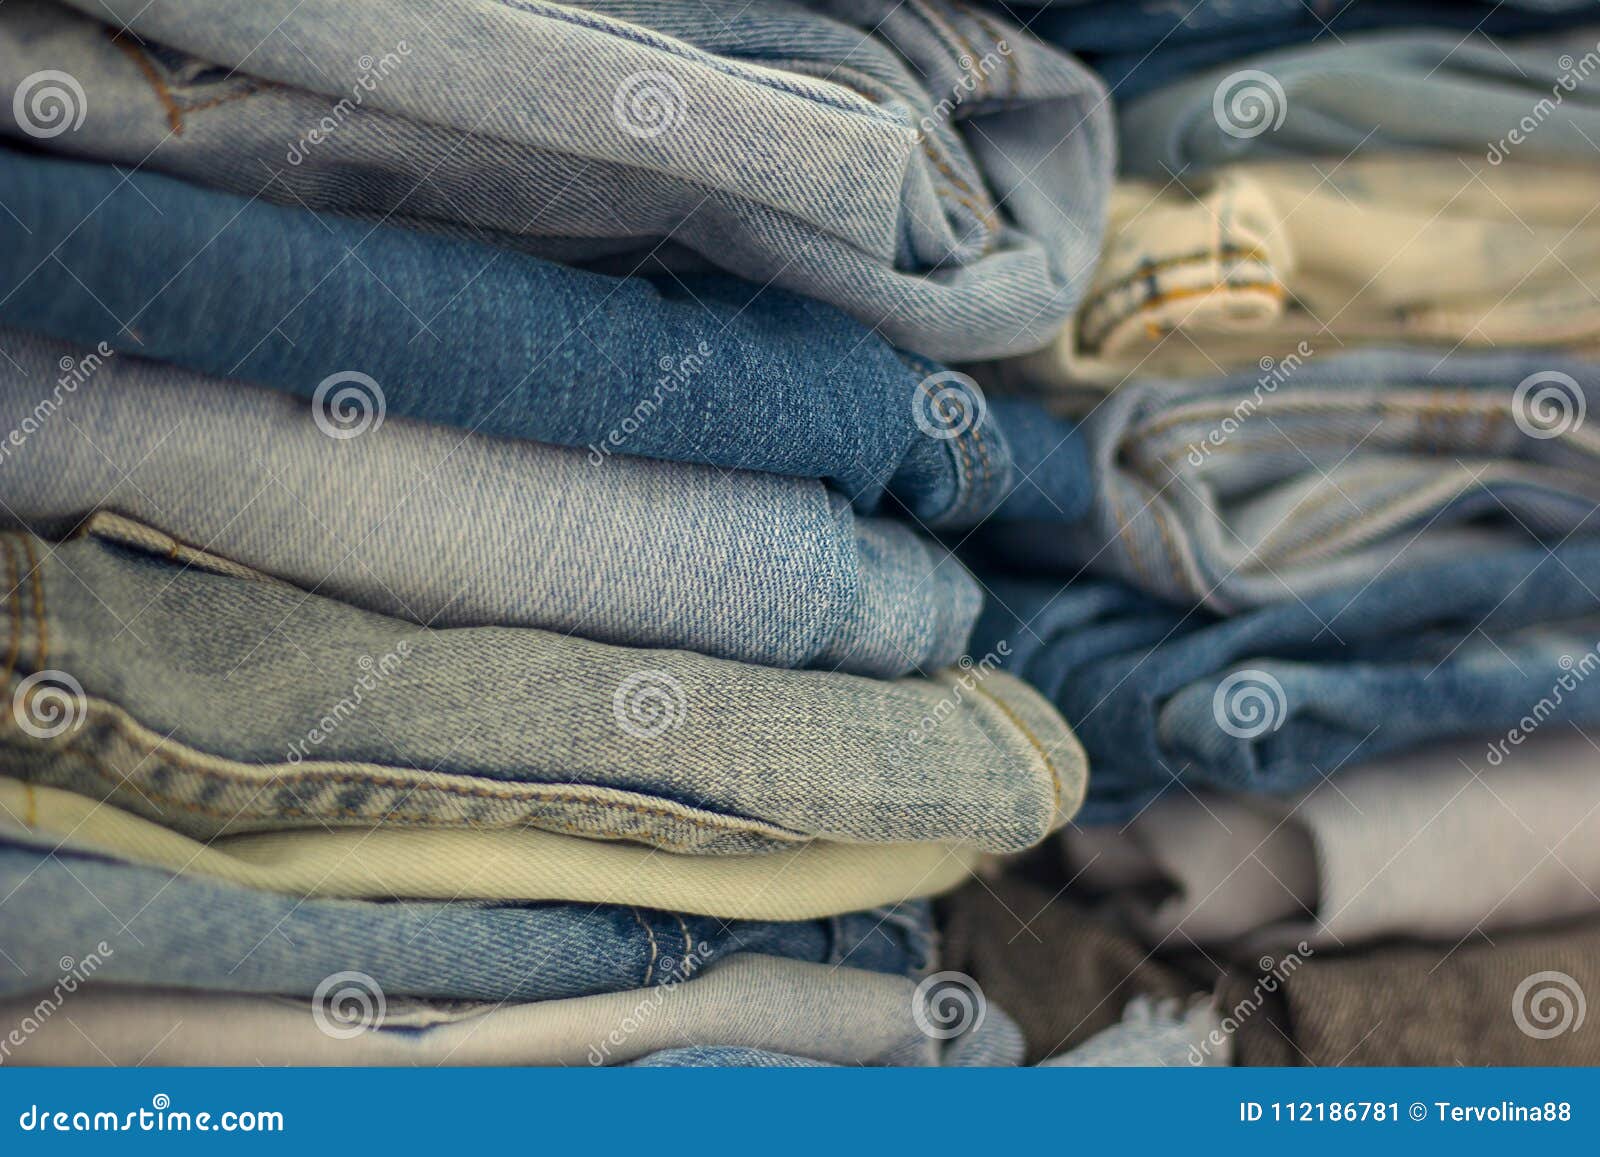 Stack of Folded Jeans of Different Colors and Shades Stock Image ...